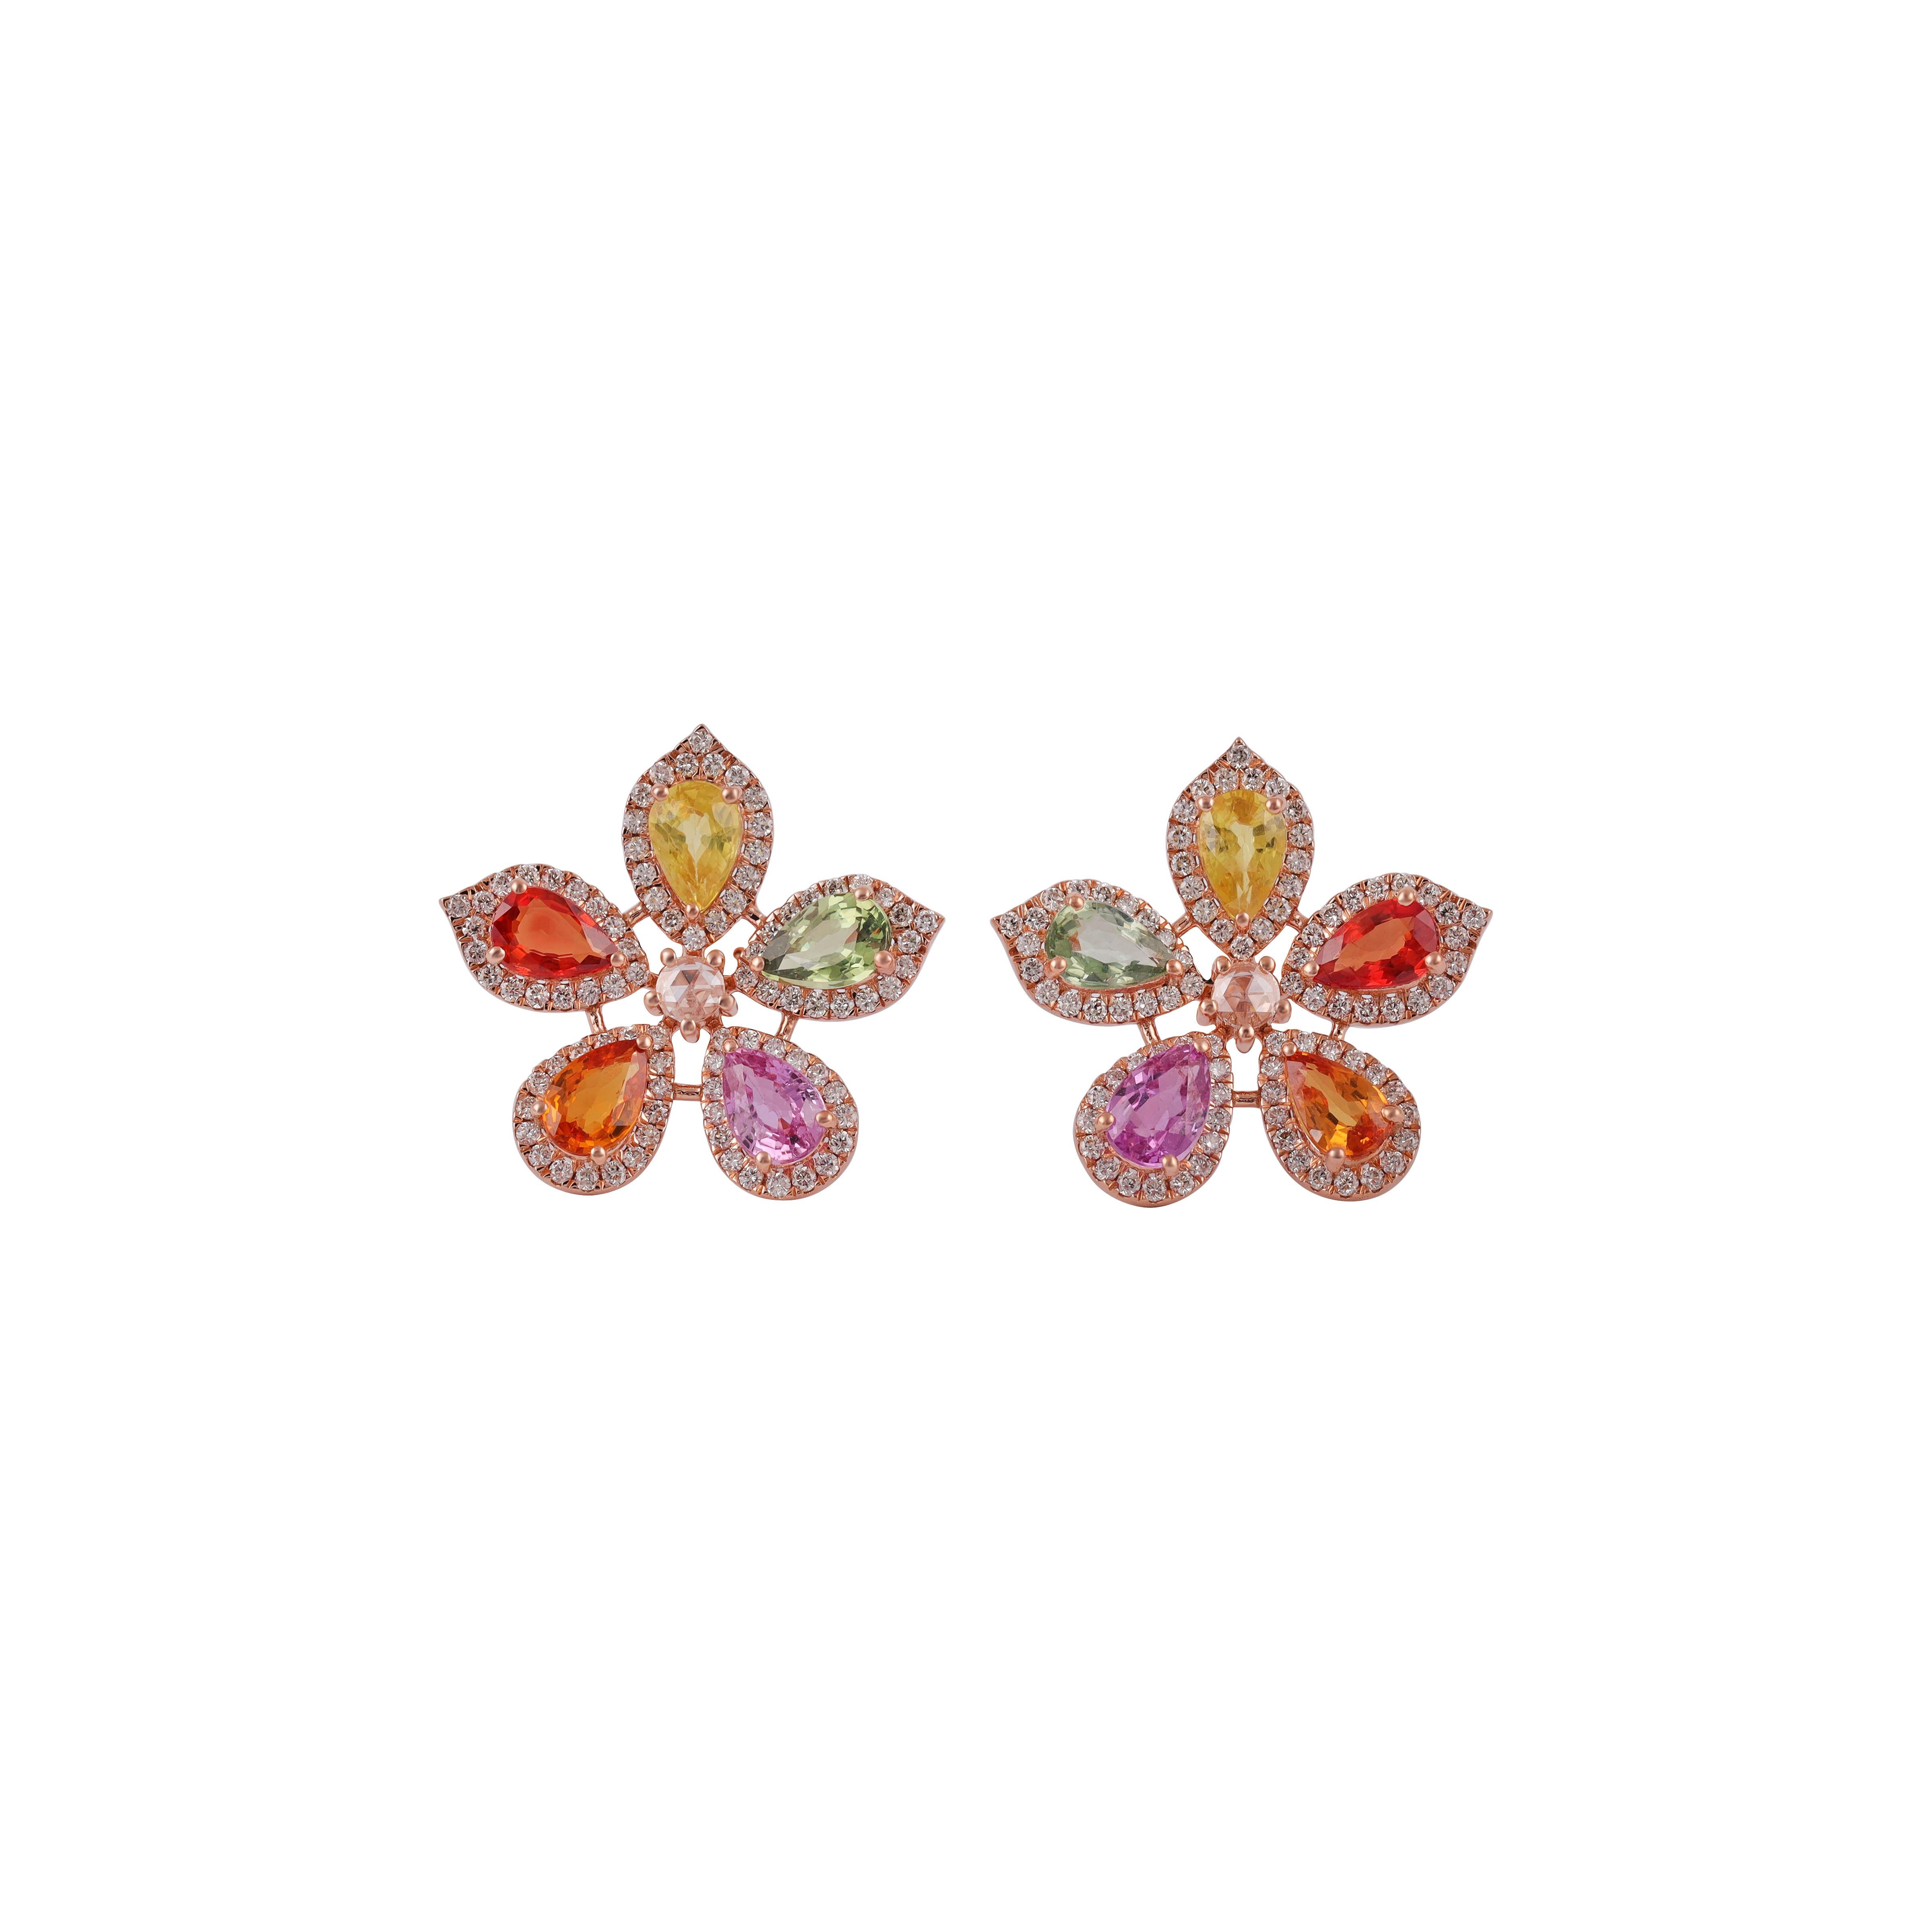 Magnificent multi sapphire & Diamond Earrings 
Pear cut multi sapphire approx. 5.22 CTS
176 Round brilliant cut diamonds 0.89 CTS
2 rose cut diamond 0.08 CTS
18 k Rose gold mounting 5.65 GMS

Custom Services
Request Customization